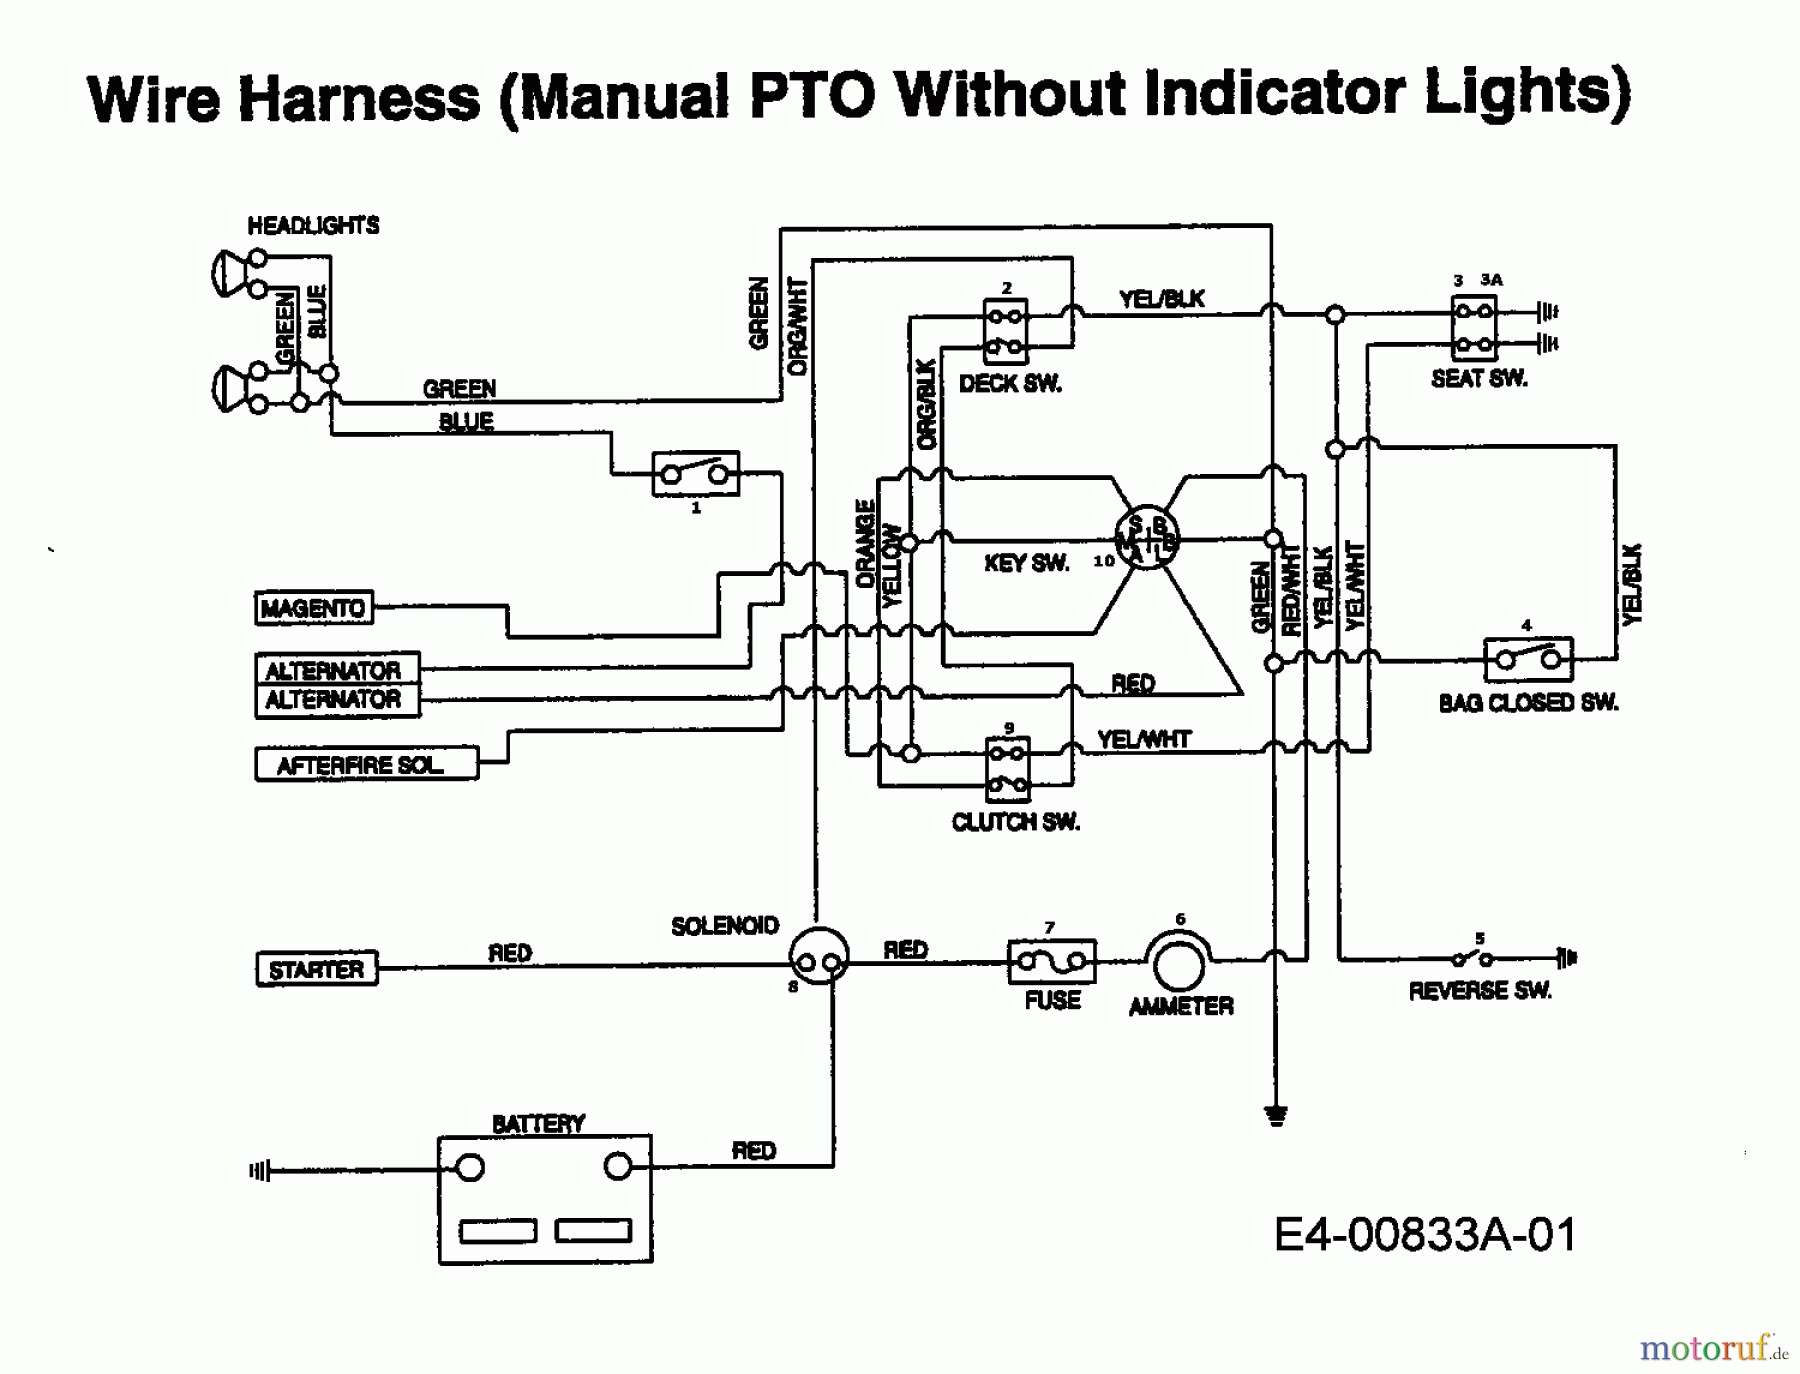  MTD Lawn tractors EH 155 13AD795N678  (1997) Wiring diagram without indicator lights